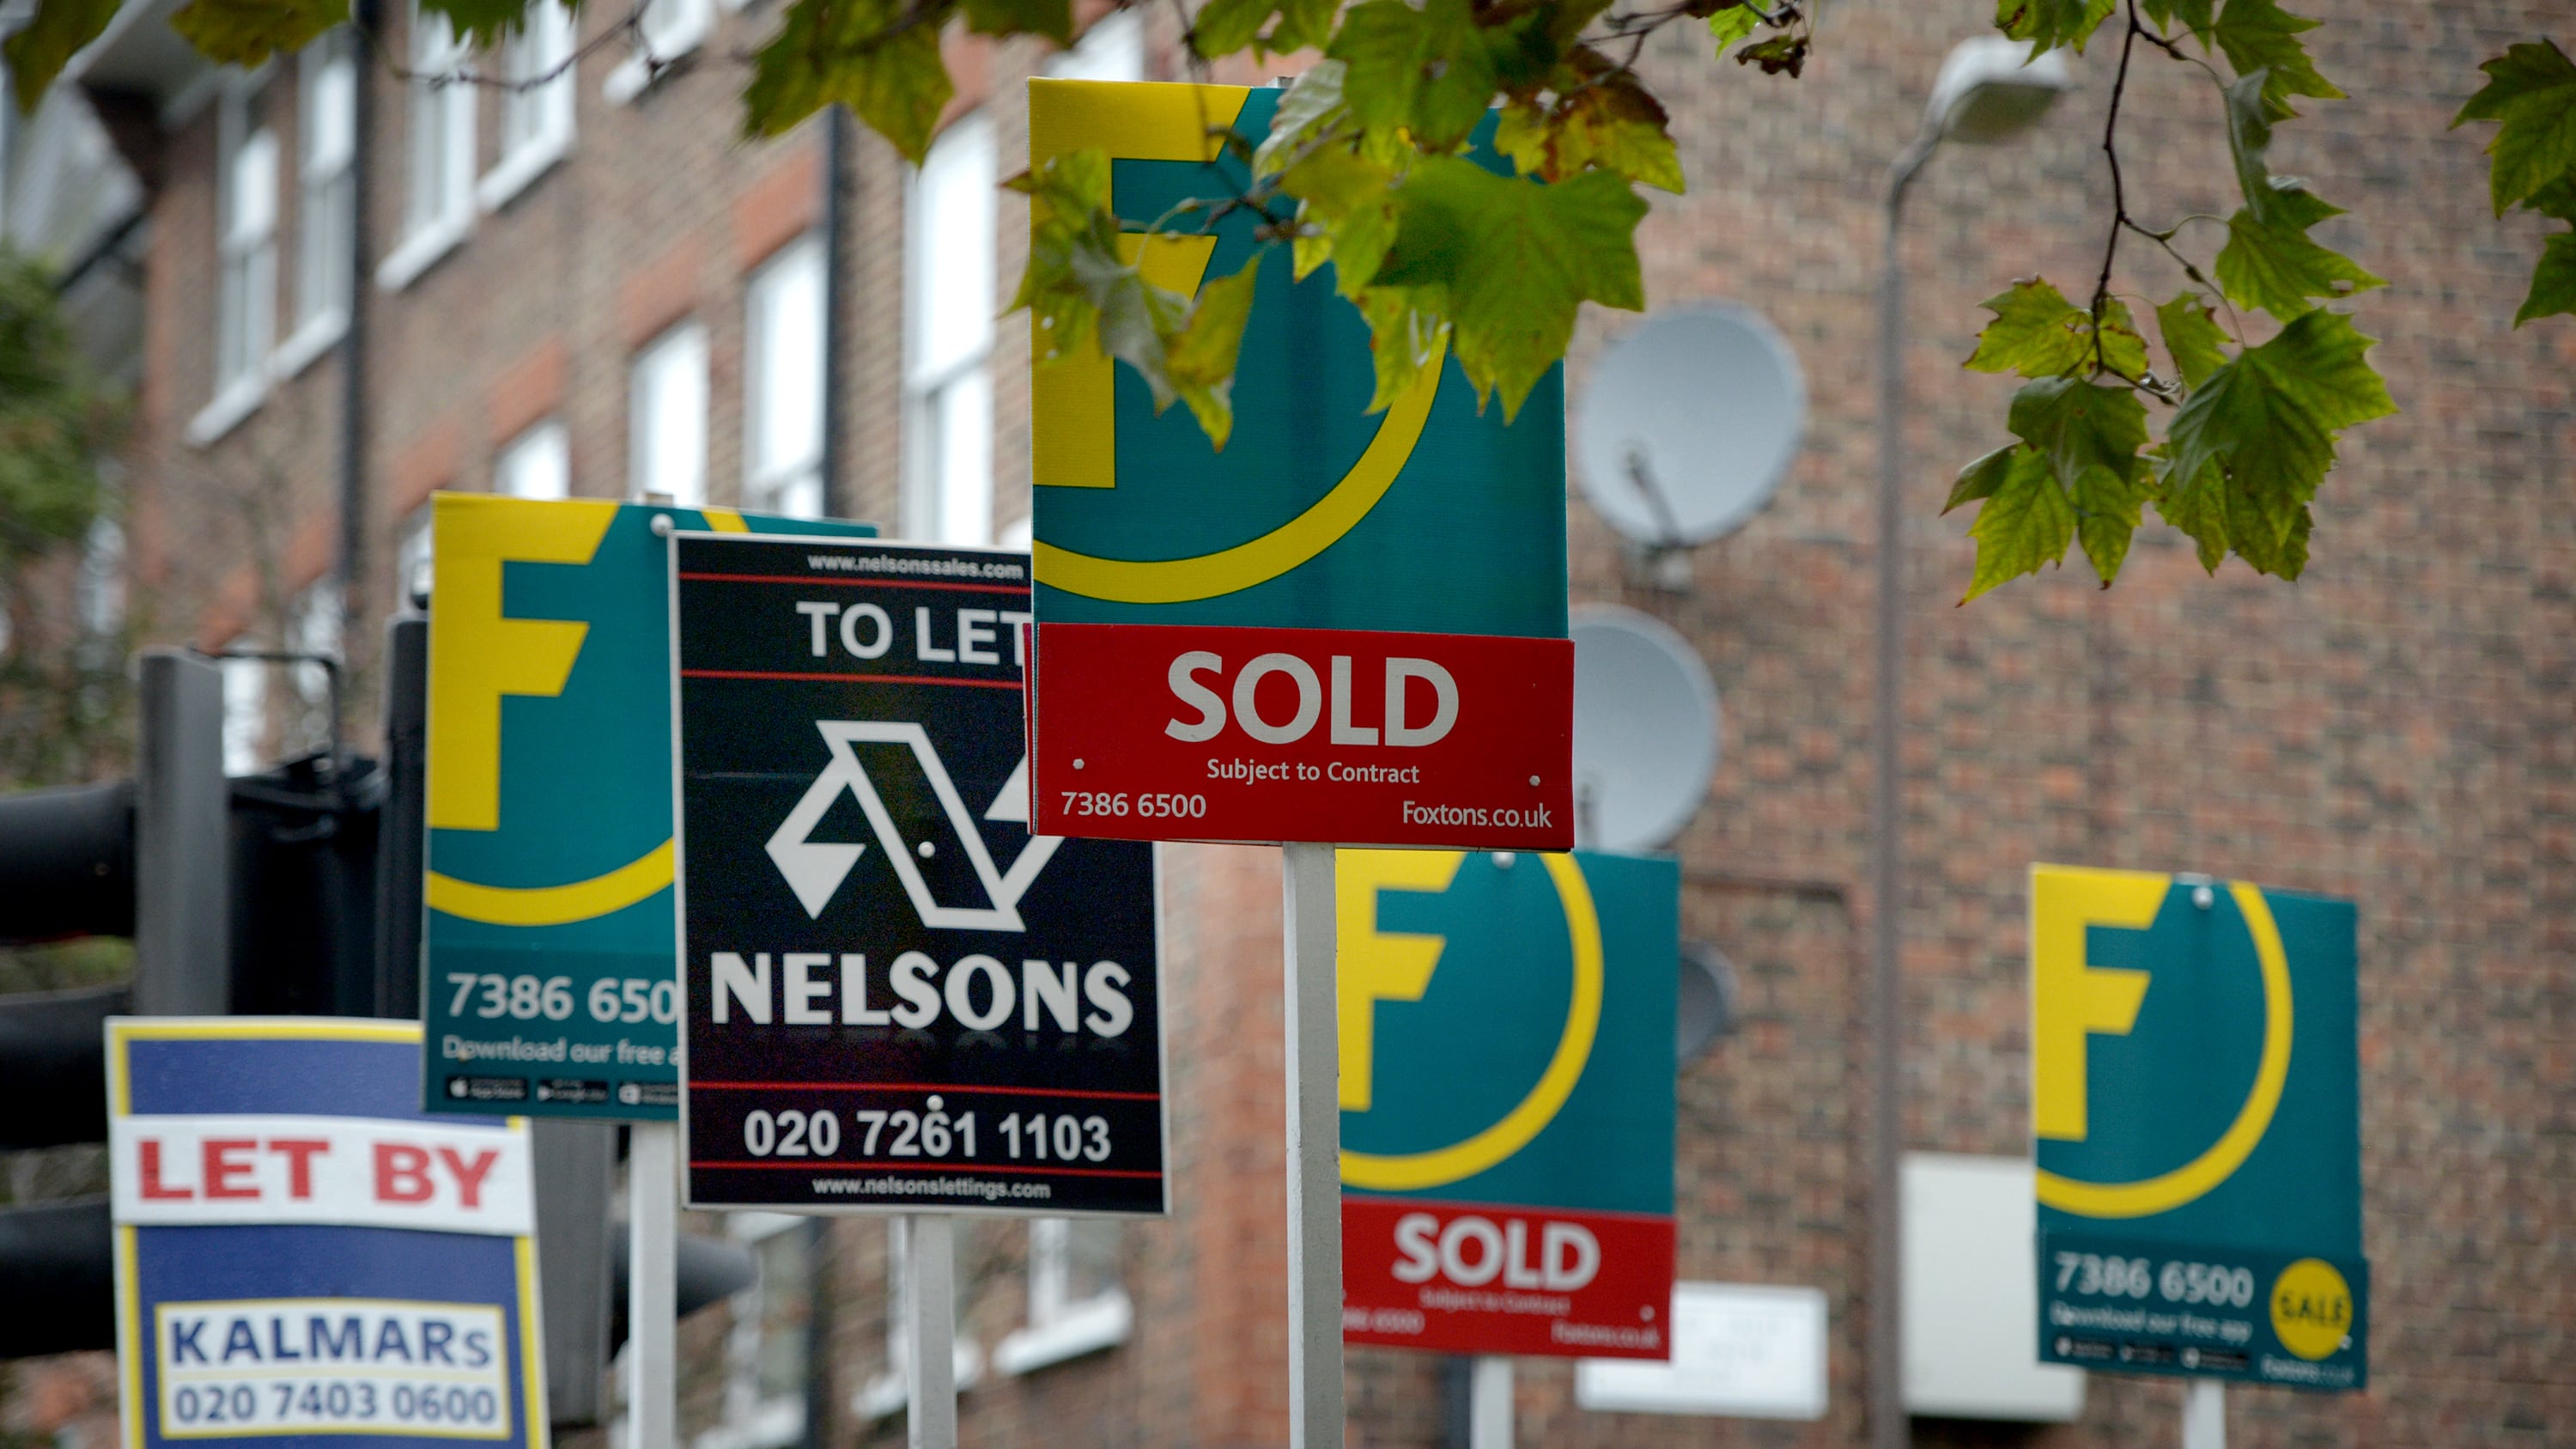 Property website Zoopla said this week that it expects house price inflation to remain muted